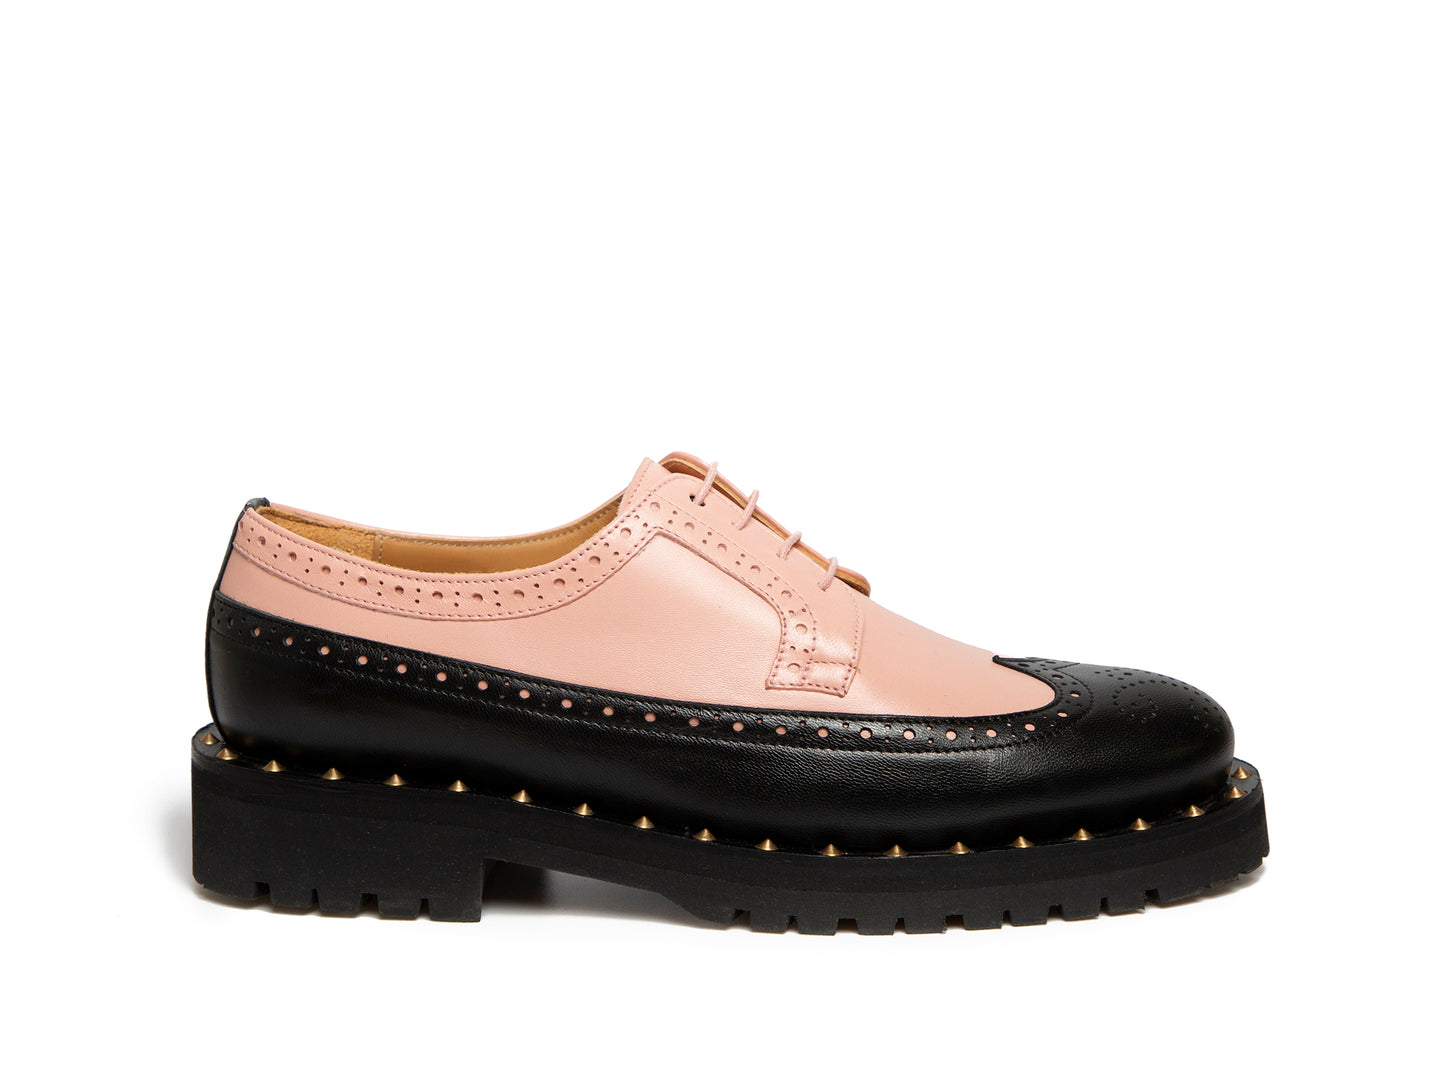 FLAVIA - Pink and Black Long Wing Derby Shoe